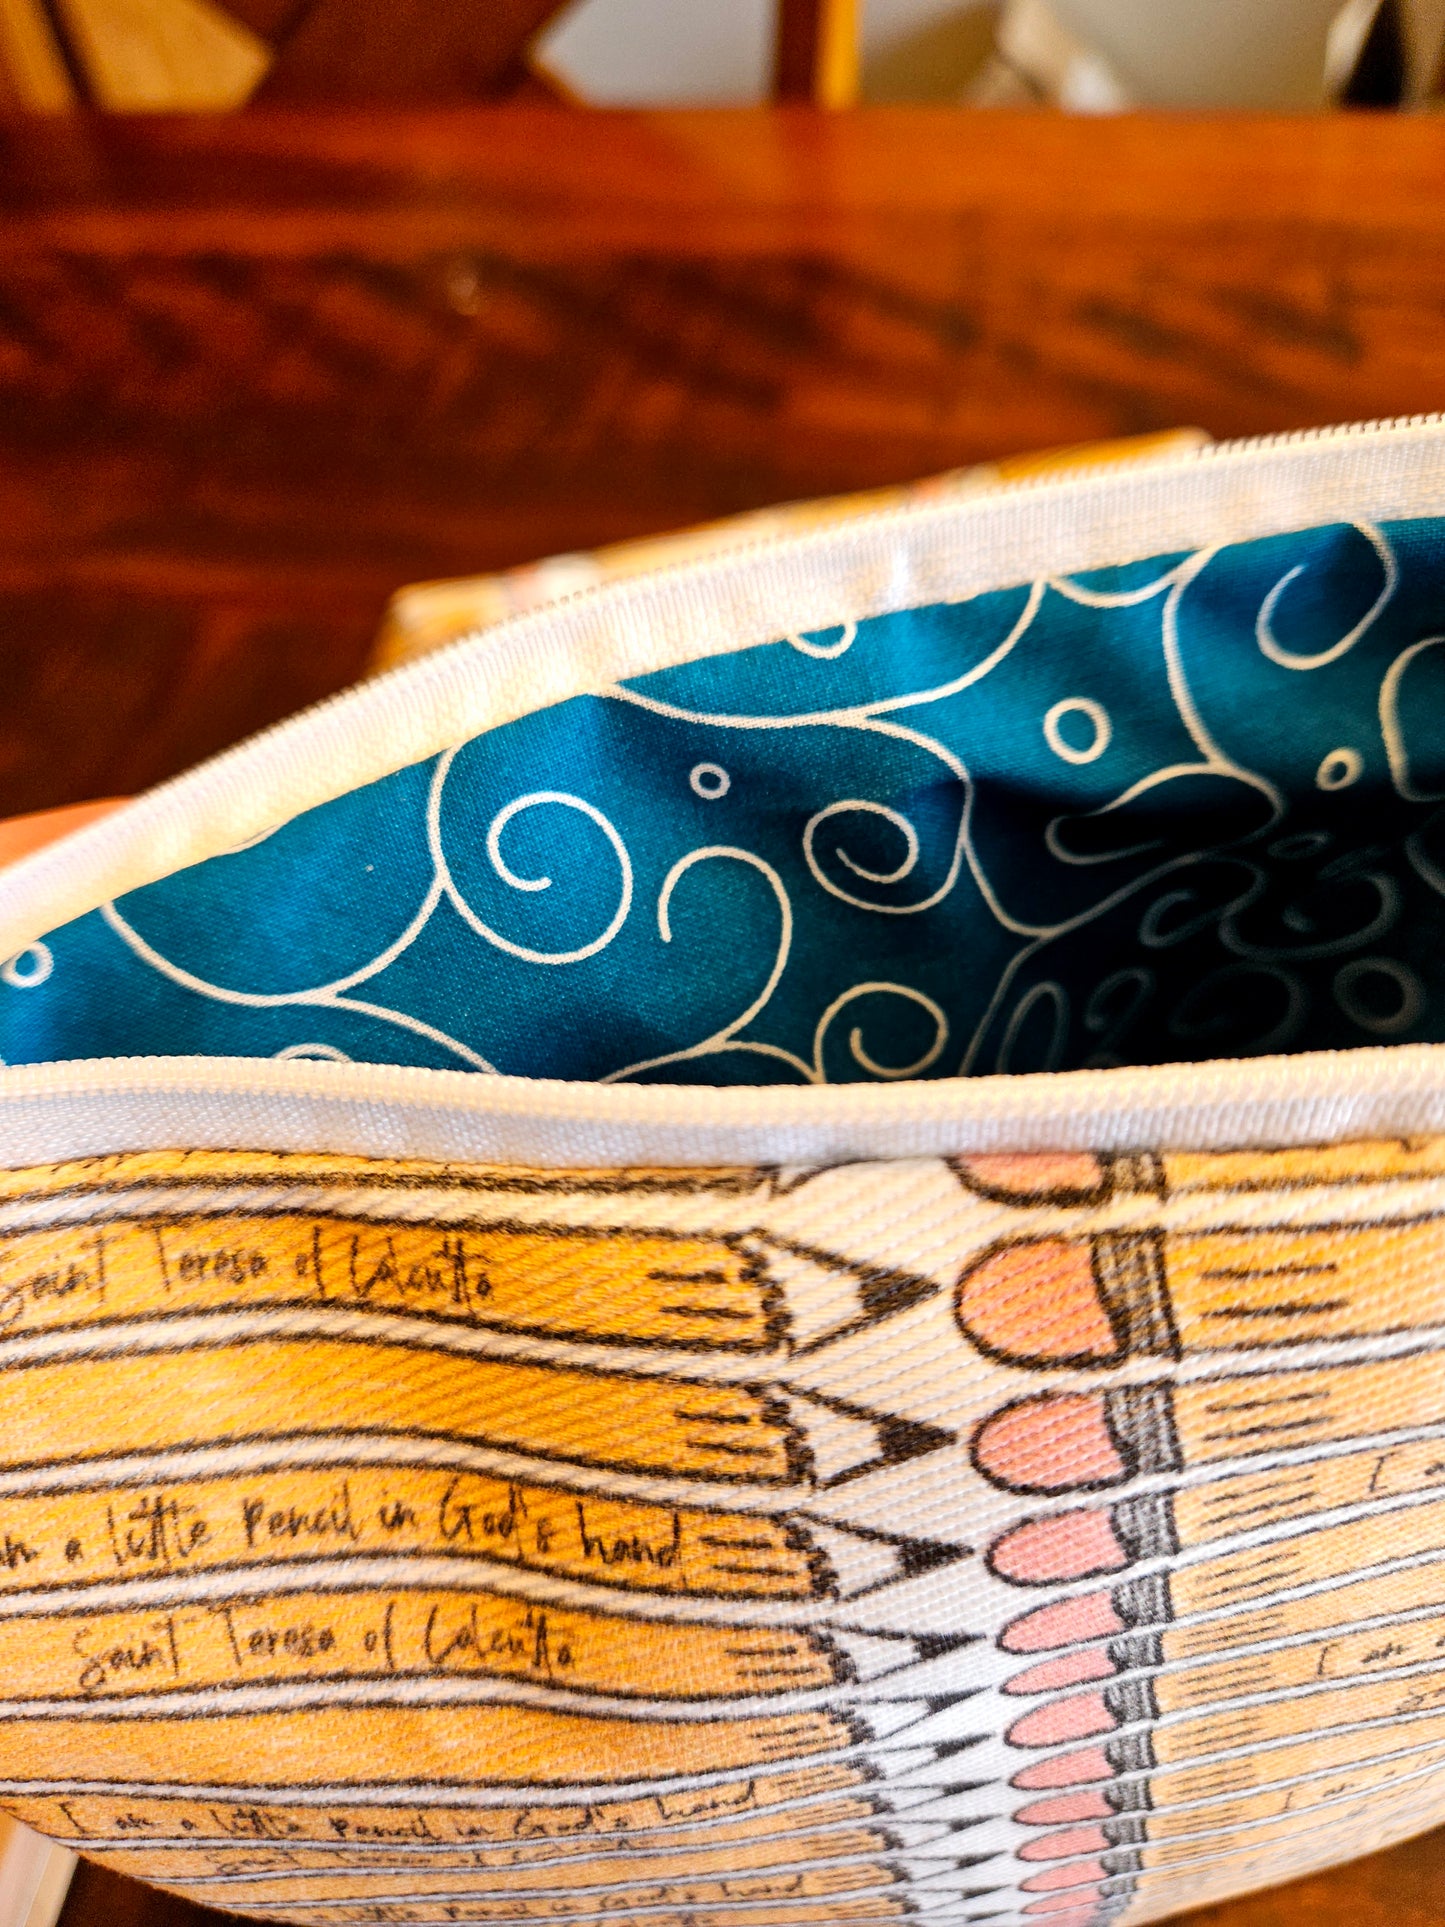 Pencil Case with Mother Teresa's "I am a Little Pencil in God's Hand" fabric